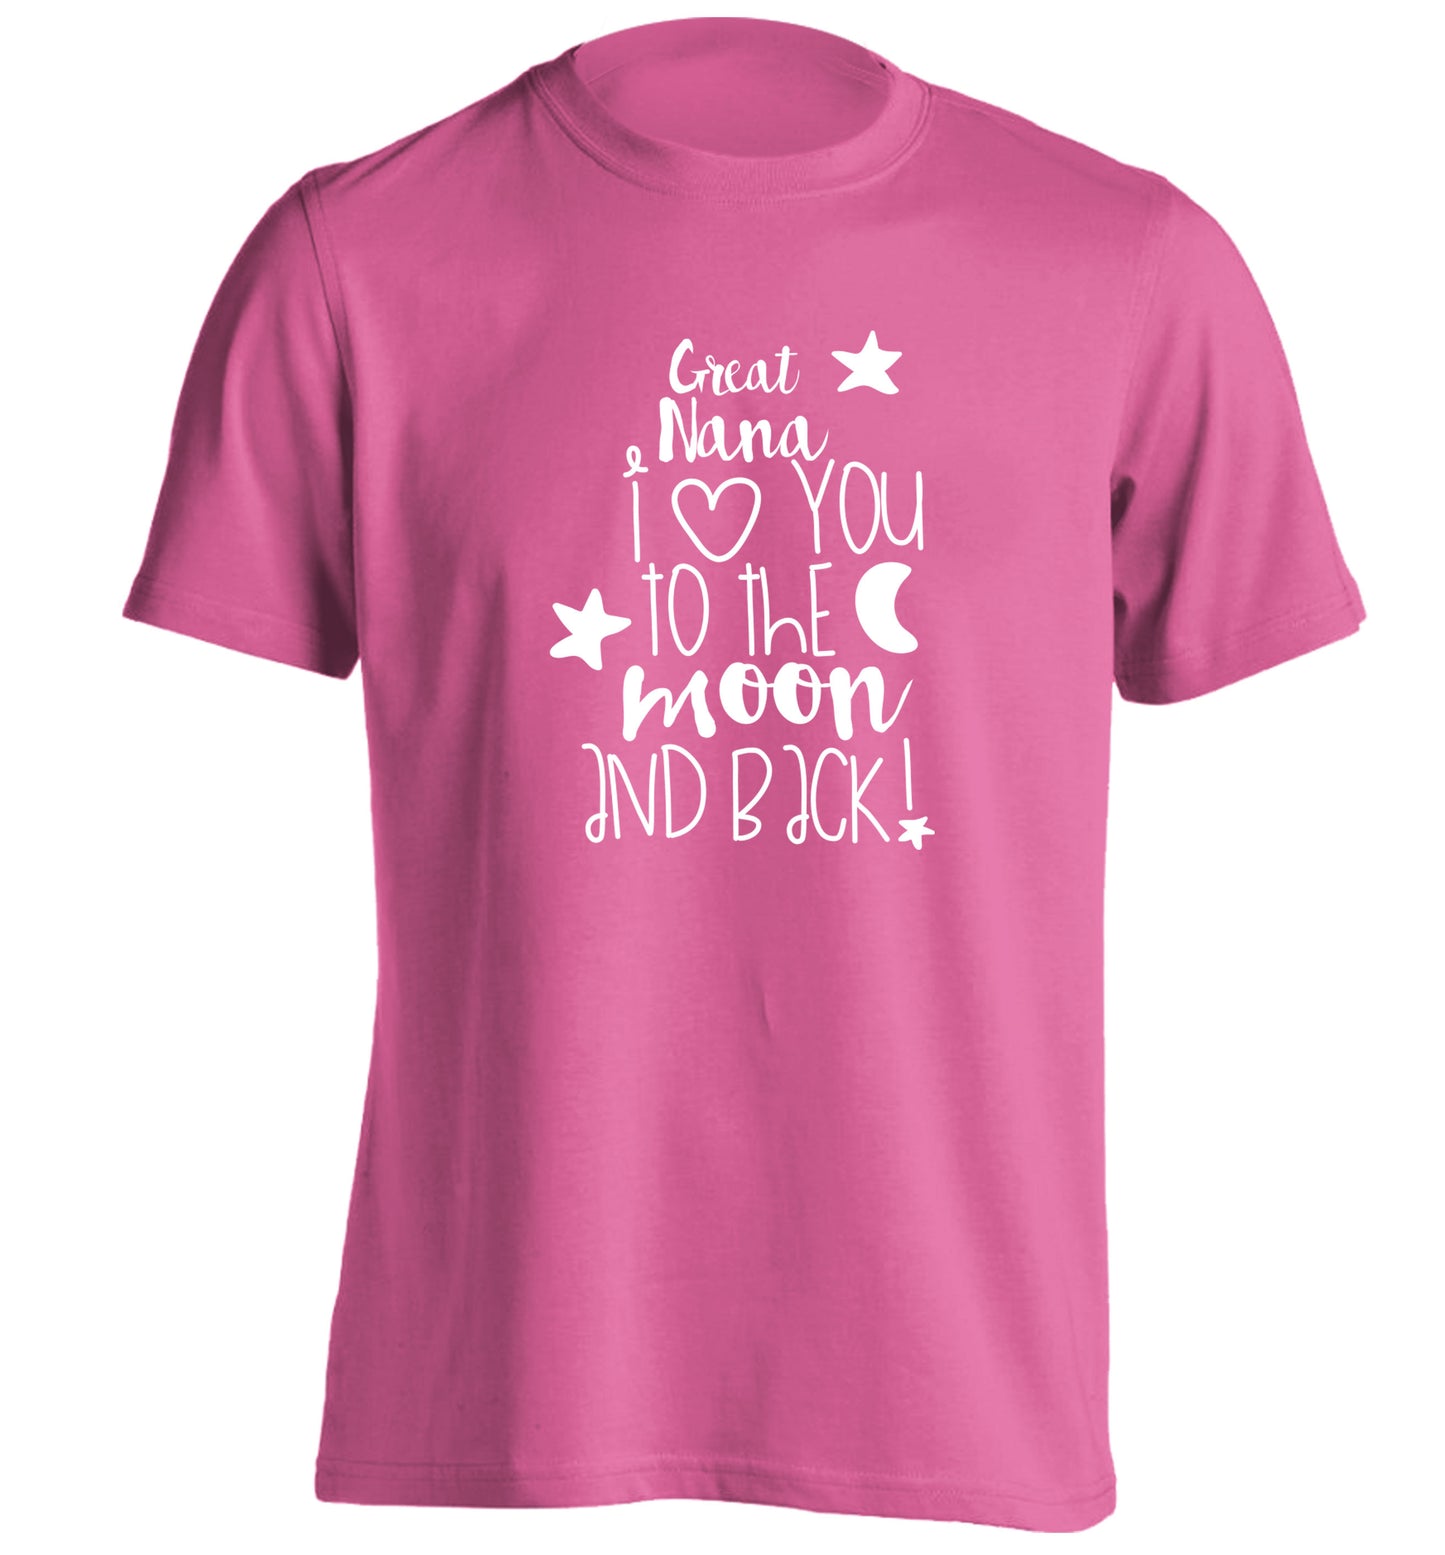 Great Nana I love you to the moon and back adults unisex pink Tshirt 2XL